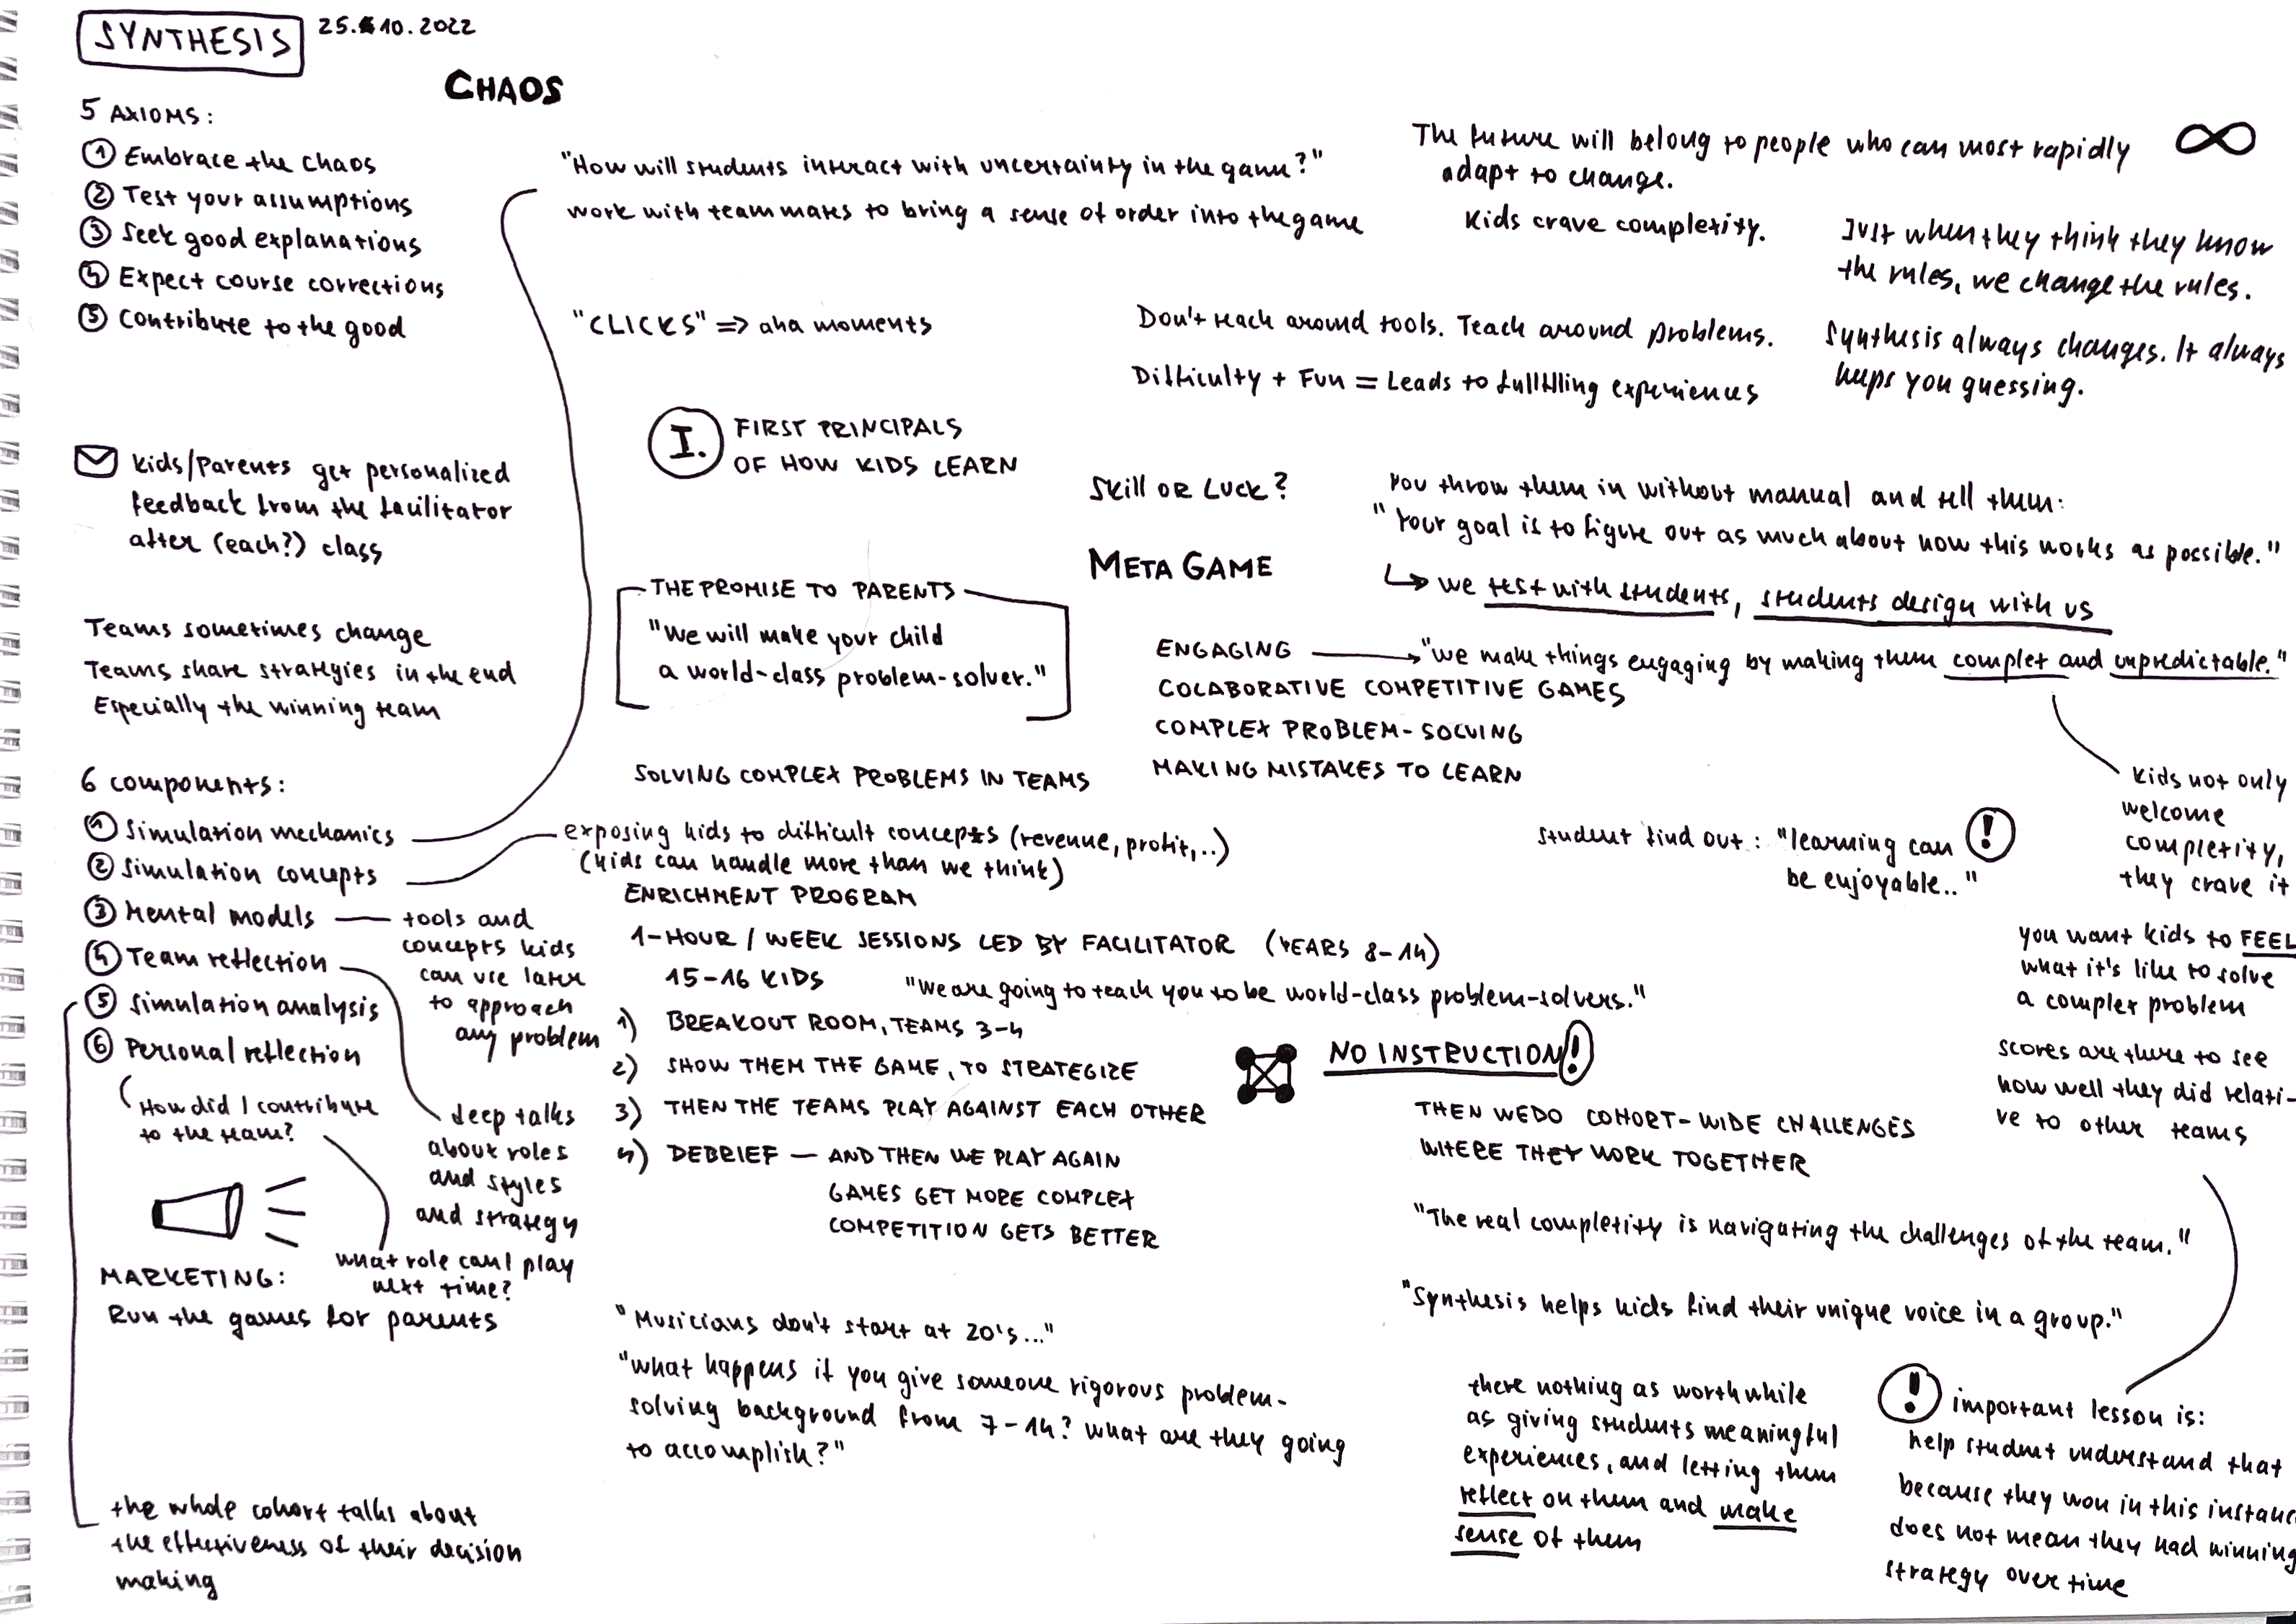 My Synthesis notes